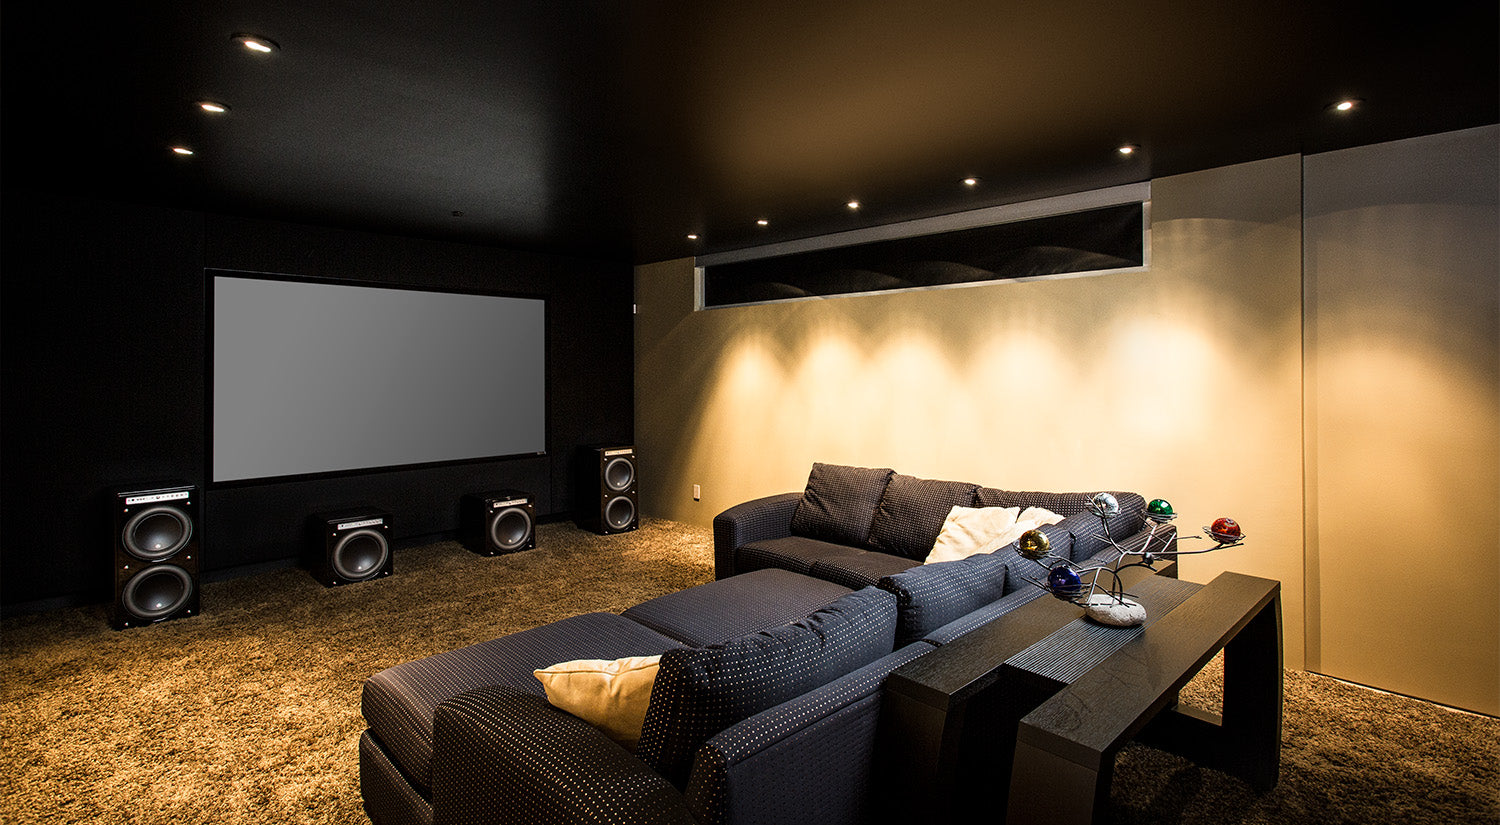 Four Fathom v2 subwoofer placed properly in home theatre for smoothness, power, and consistency.